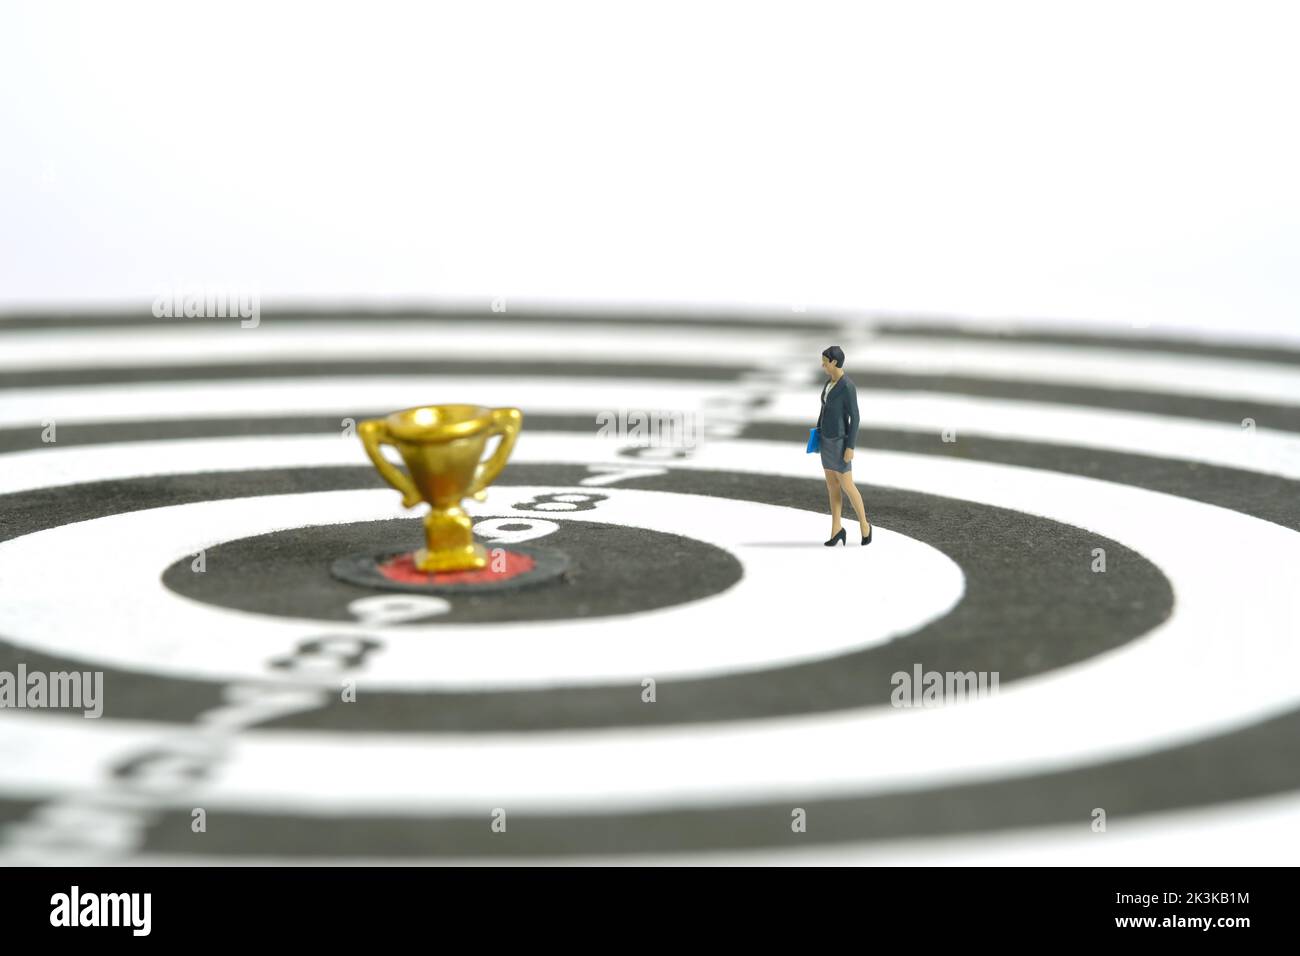 Miniature people toy figure photography. A businesswoman walking above dartboard with gold trophy at the center, isolated on white background. Image p Stock Photo